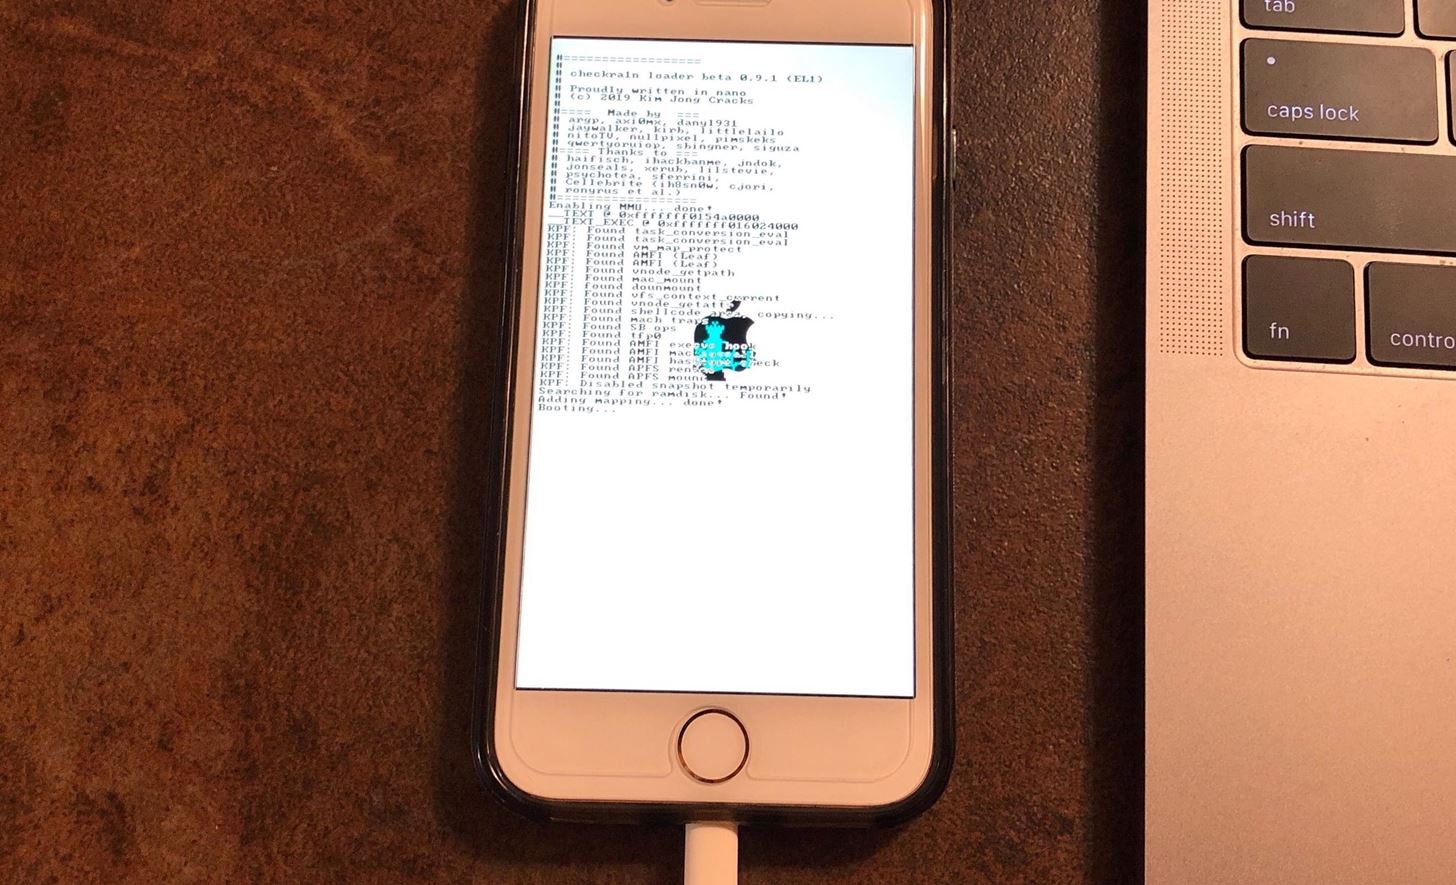 How to Jailbreak iOS 12.3 to iOS 13.4.1 on Your iPhone Using Checkra1n